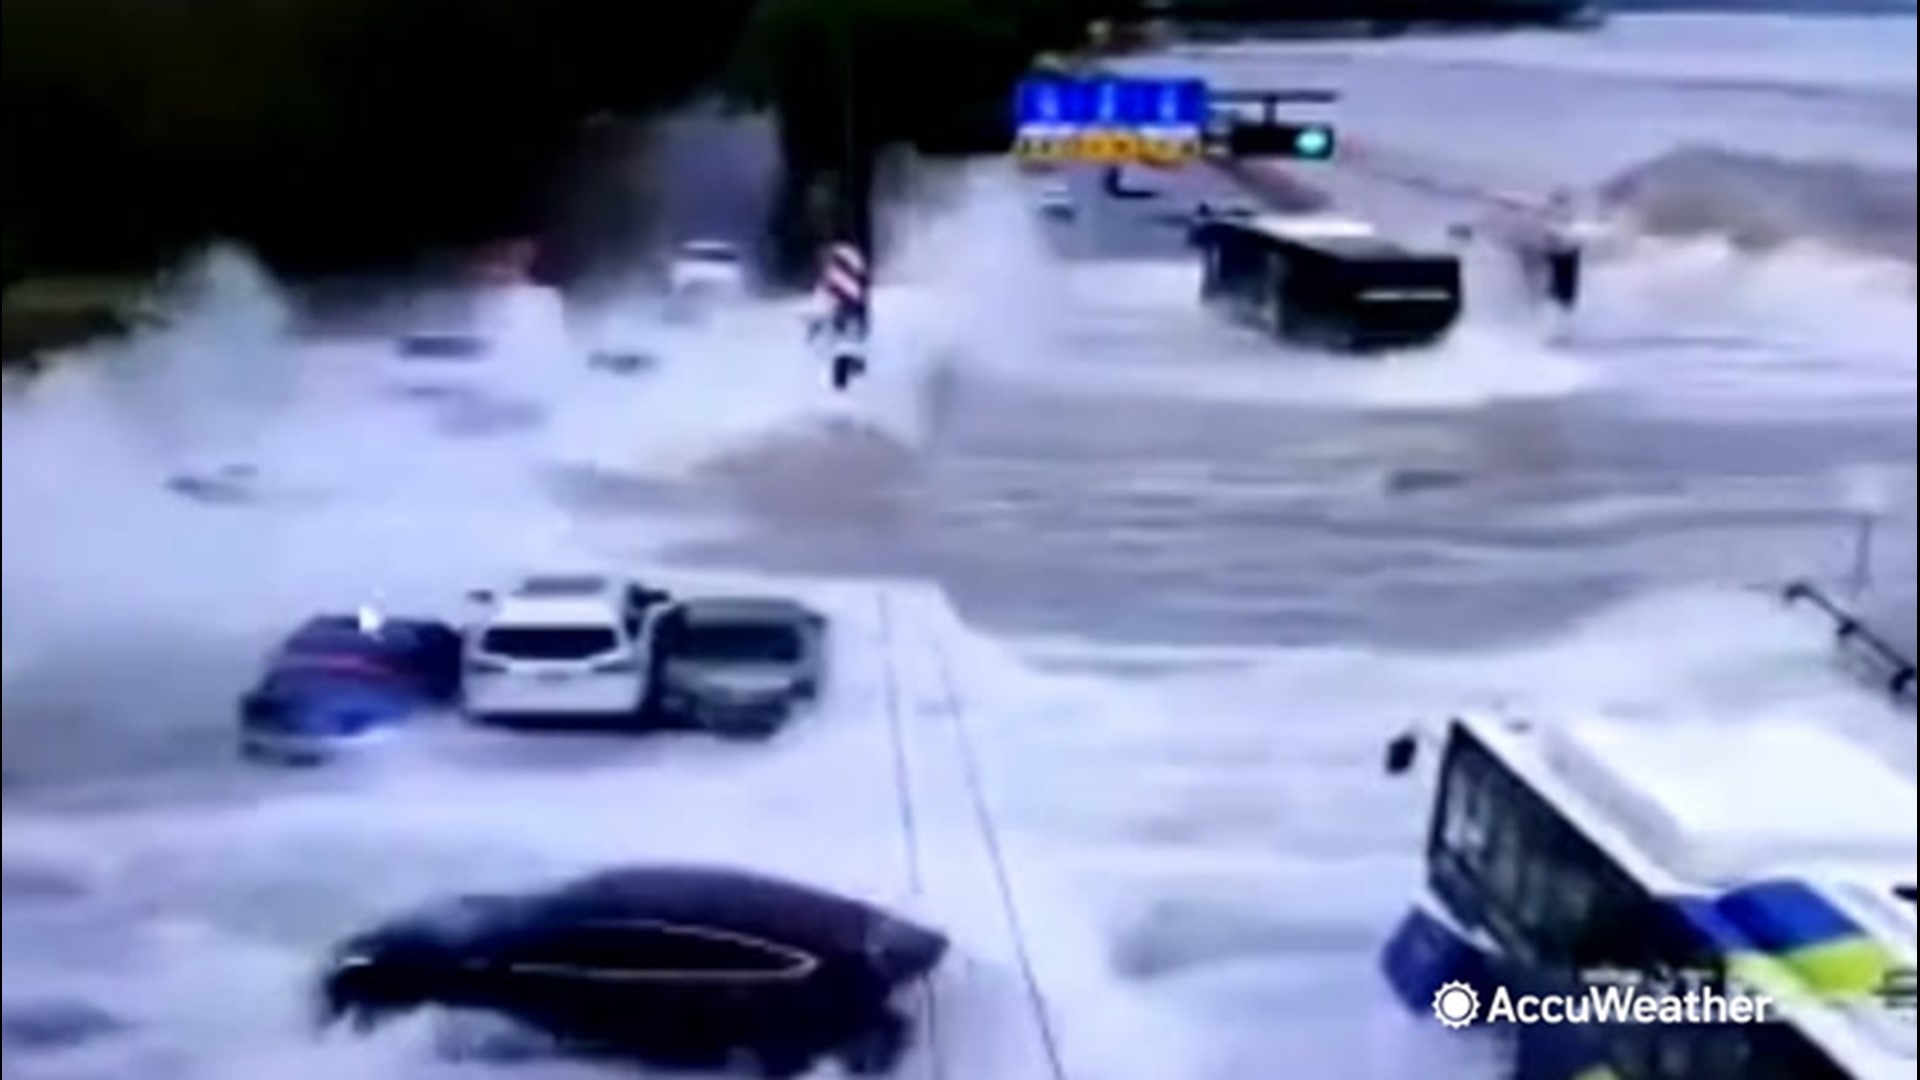 High tide waves crashed over a bank and swept away several cars along a roadway in Hangzhou, China on Sept. 21.